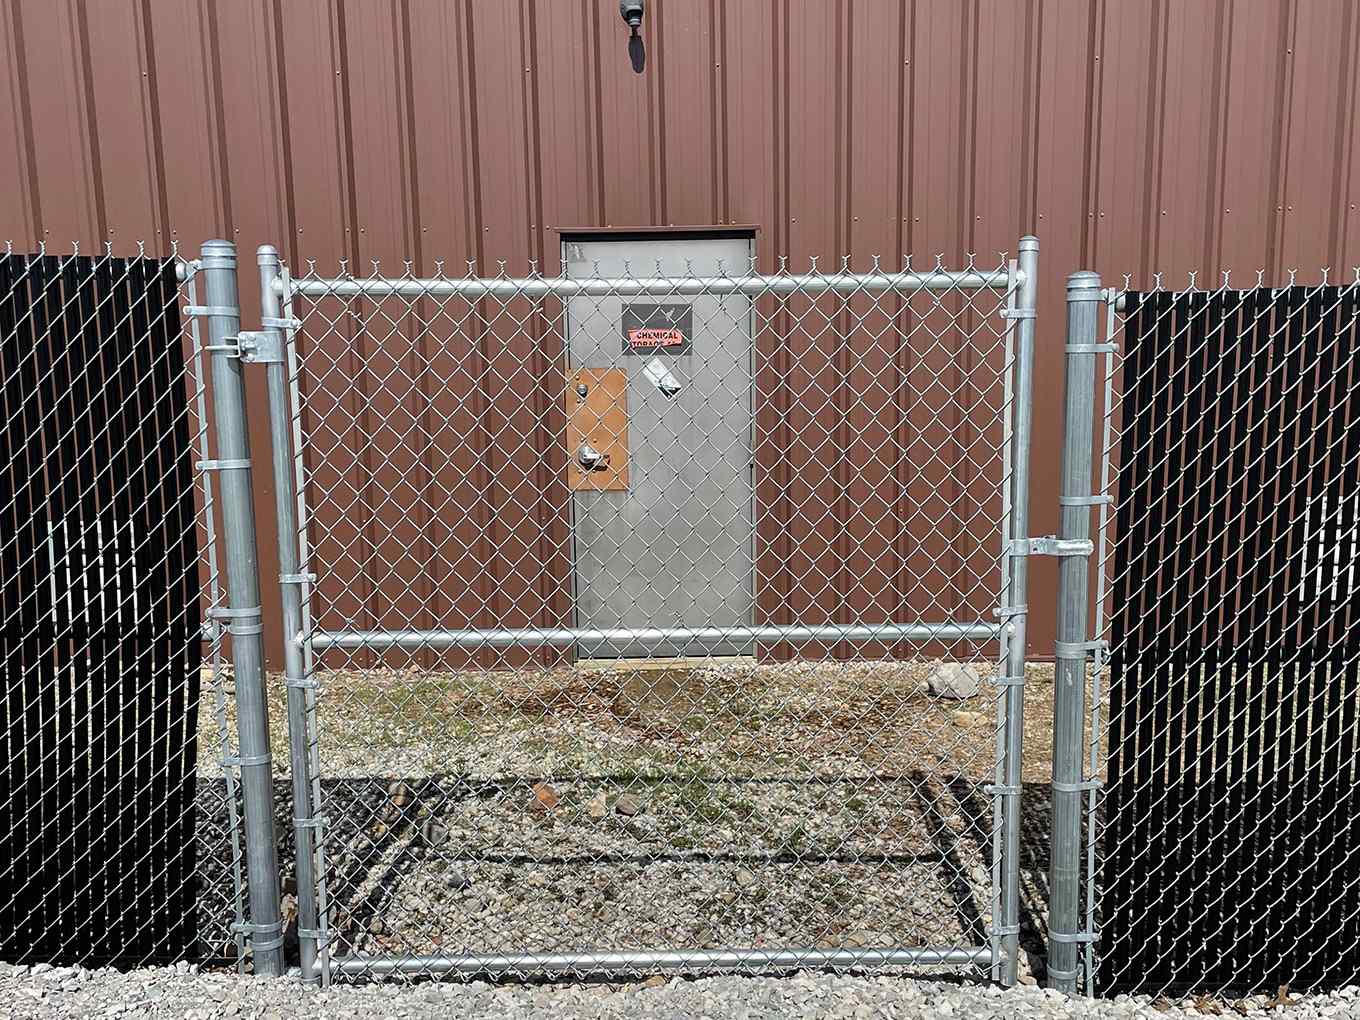 Indianapolis, Indiana commercial chain link fence example